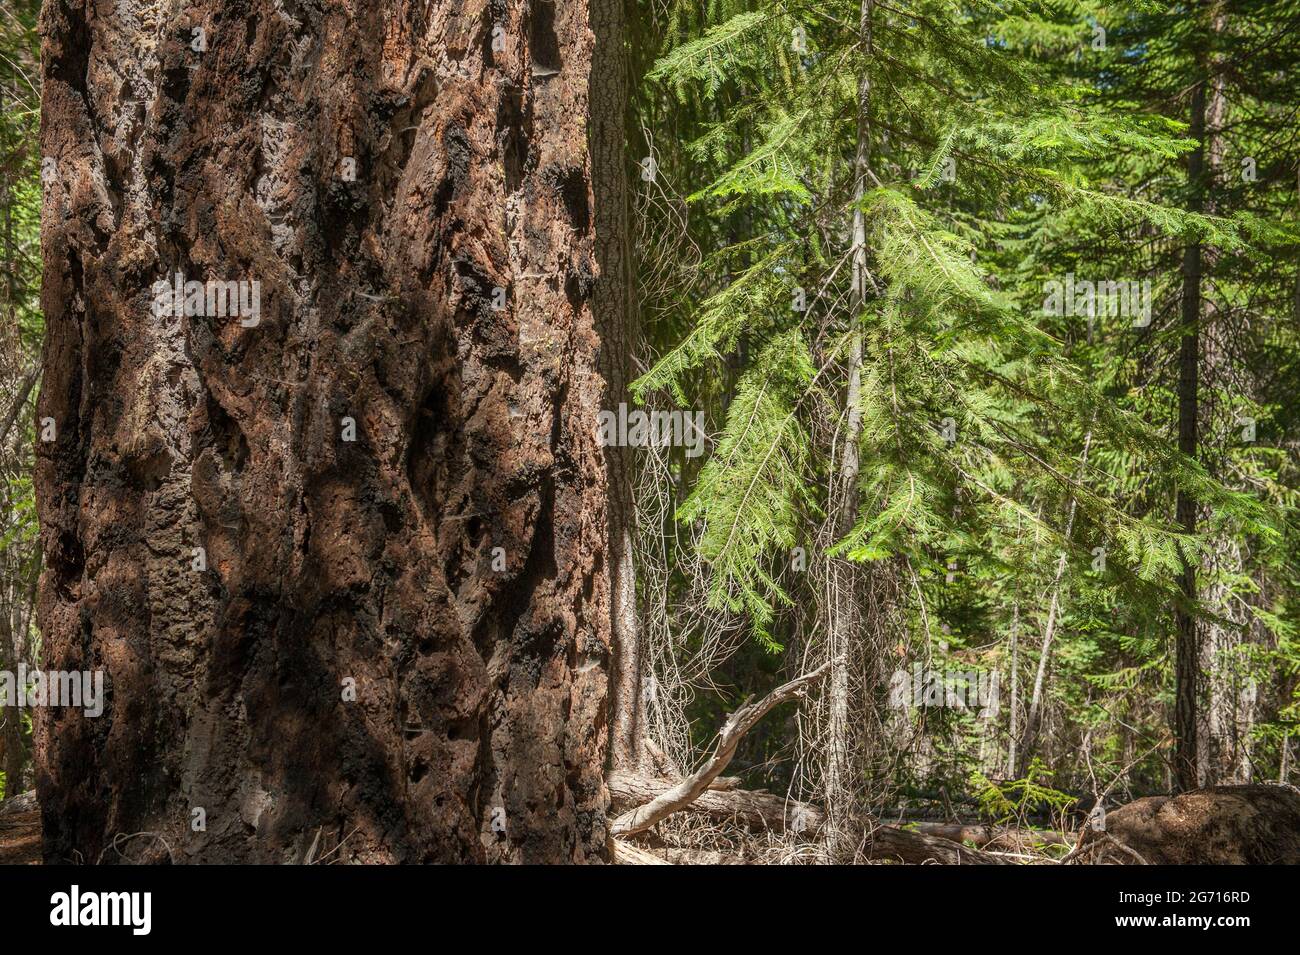 Young firs growing next to an ancient Douglas Fir hundreds of years old. Stock Photo